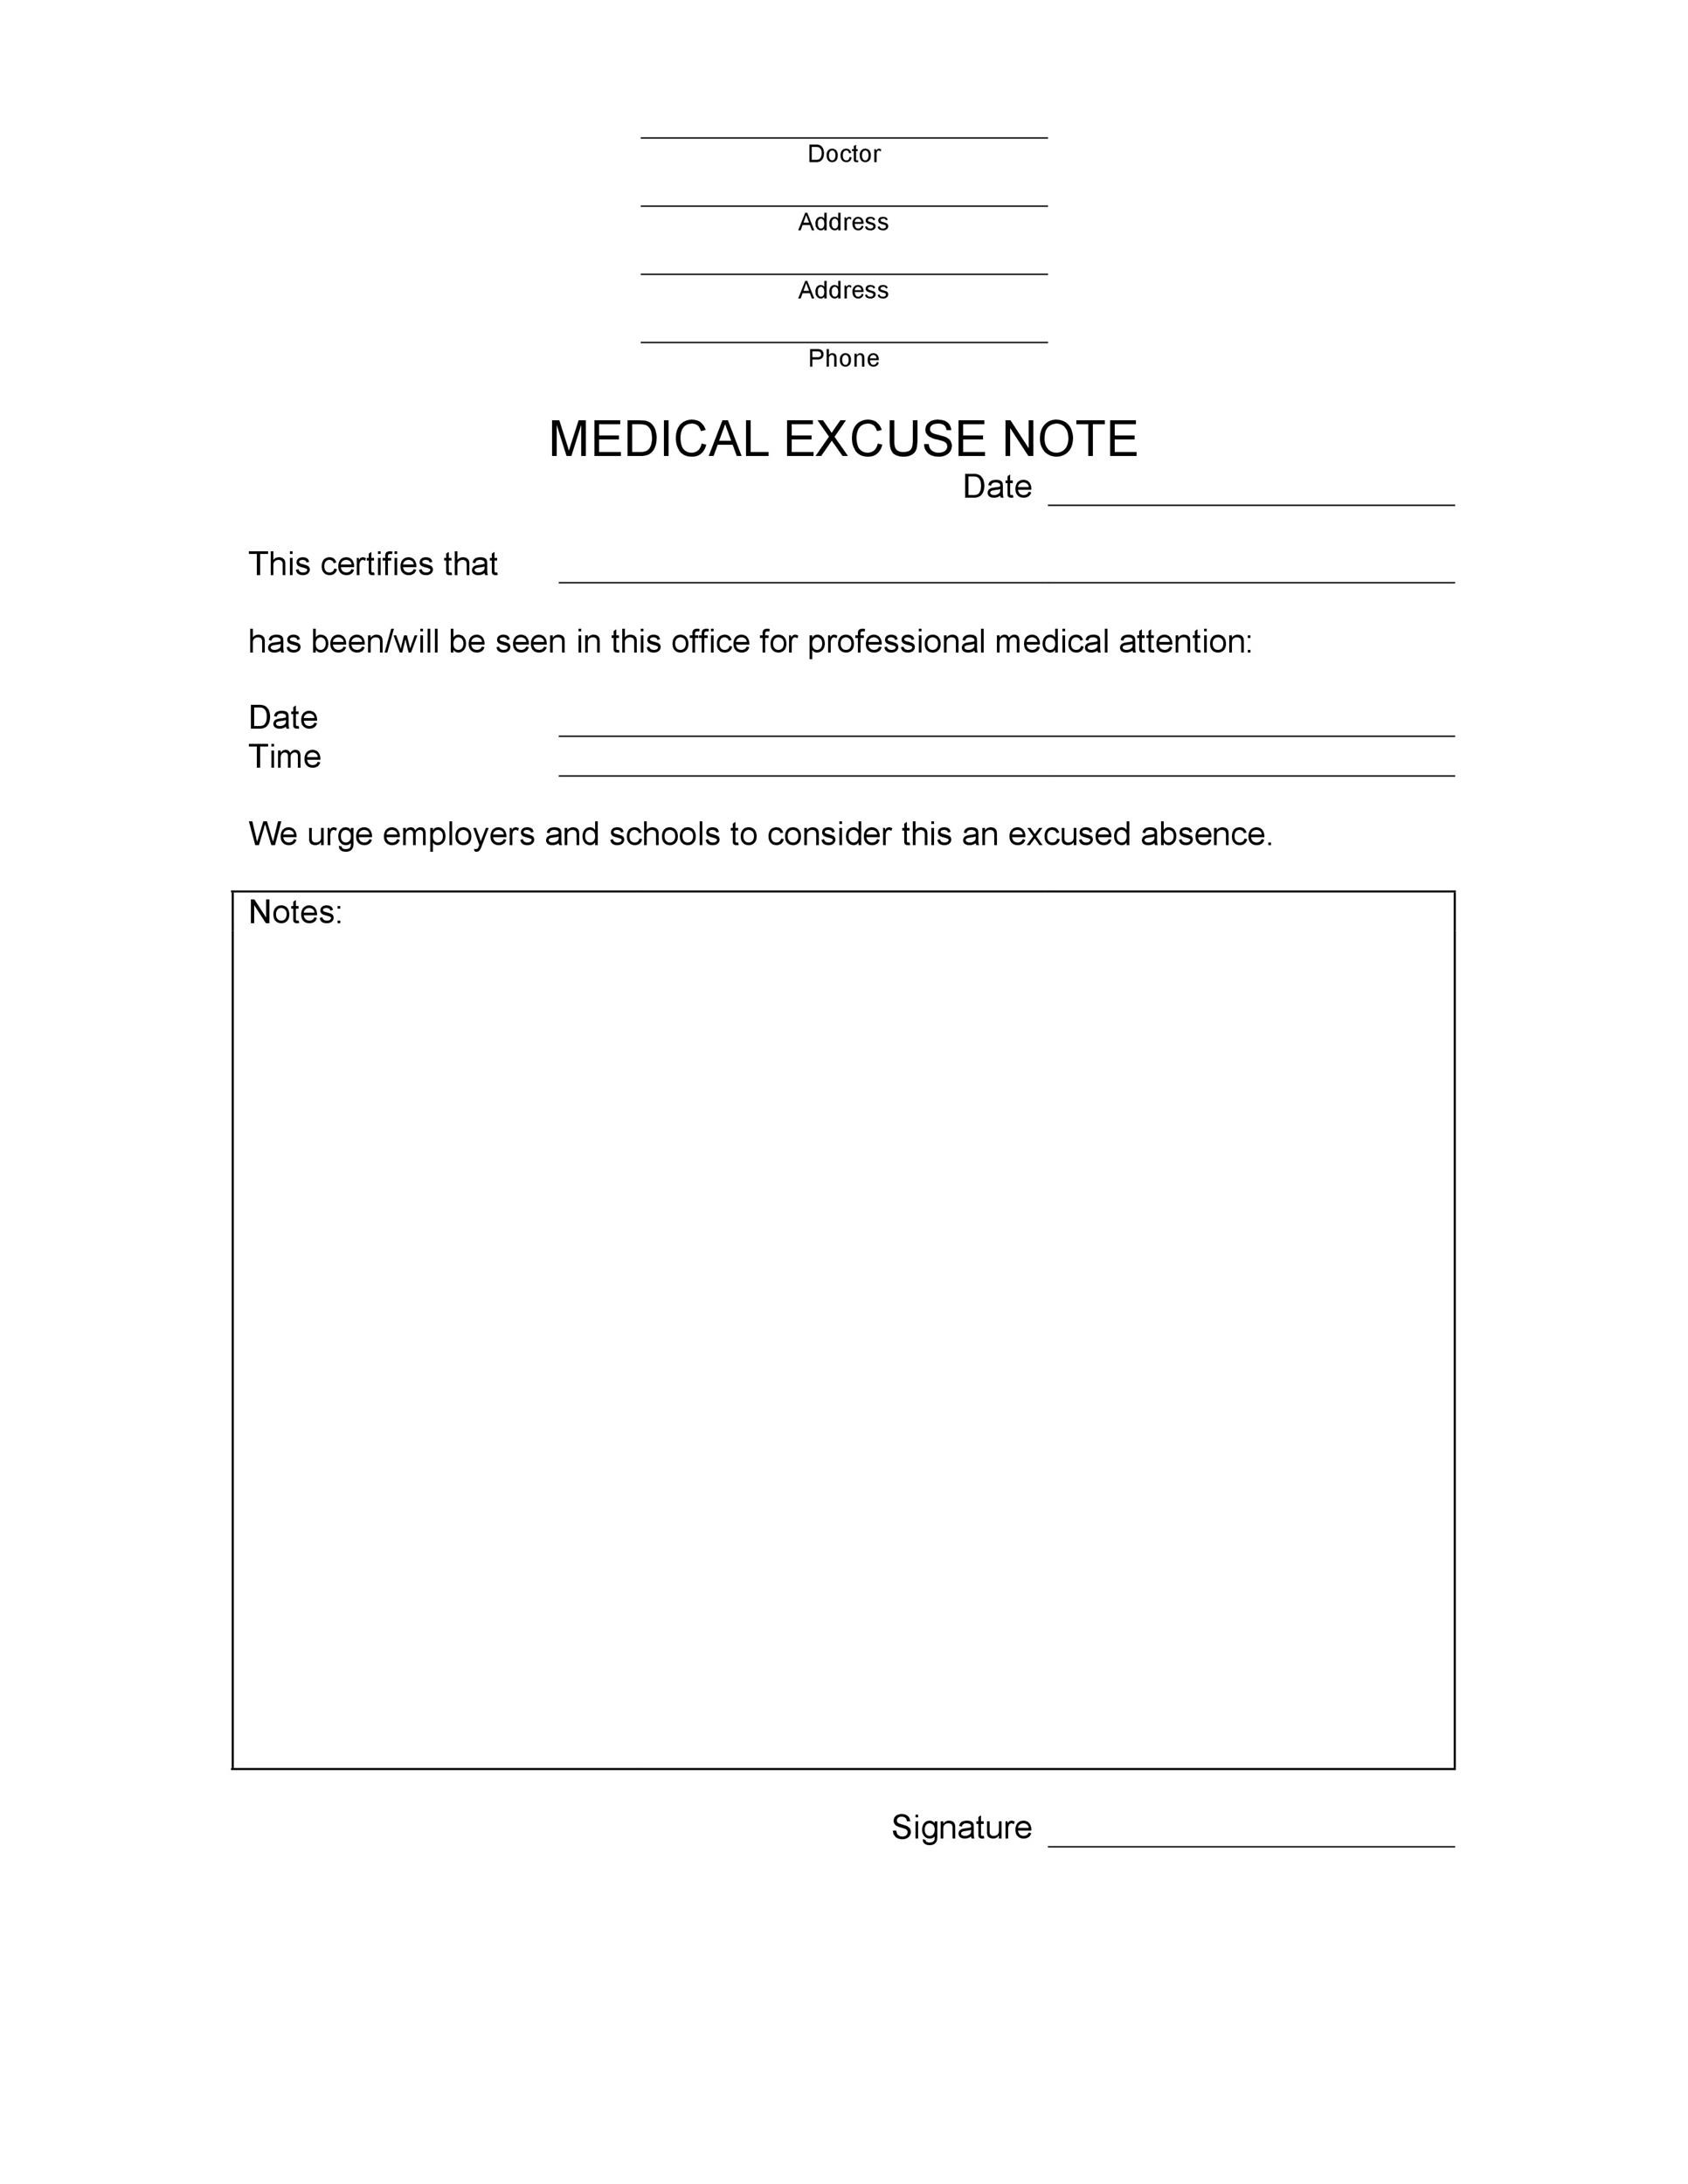 fake-doctors-note-template-kaiser-happy-living